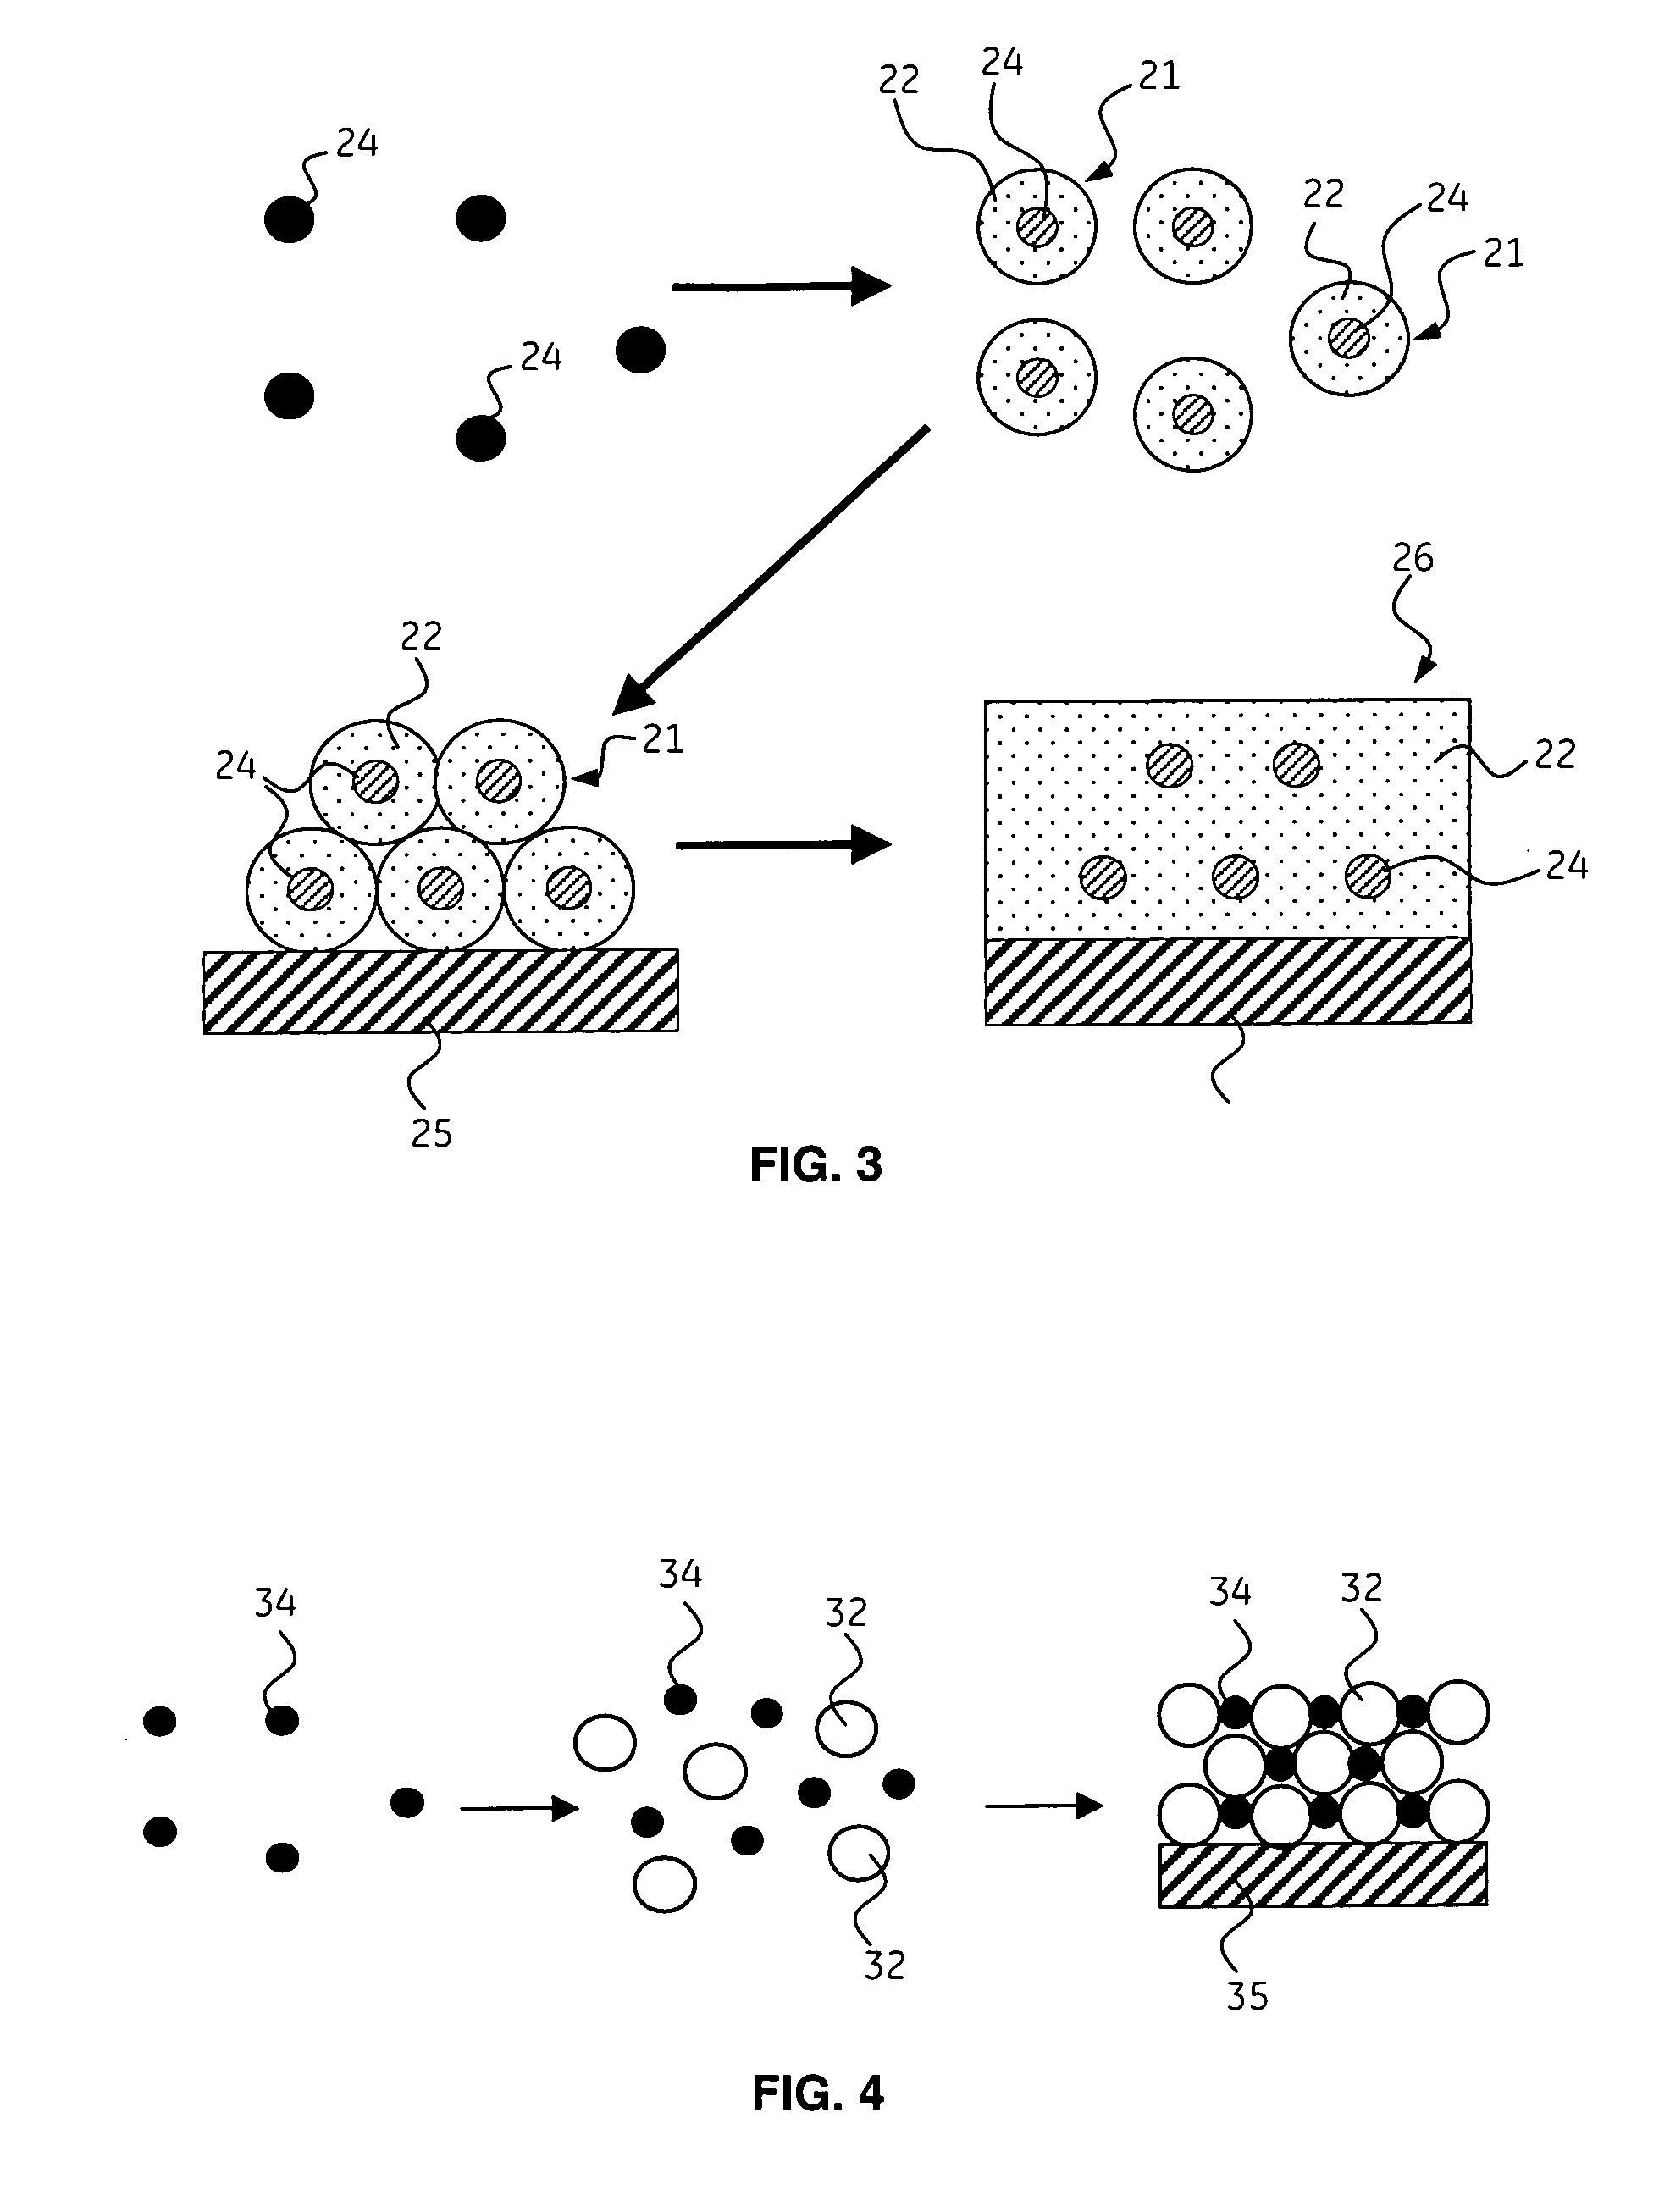 Light source incorporating a high temperature ceramic composite and gas phase for selective emission